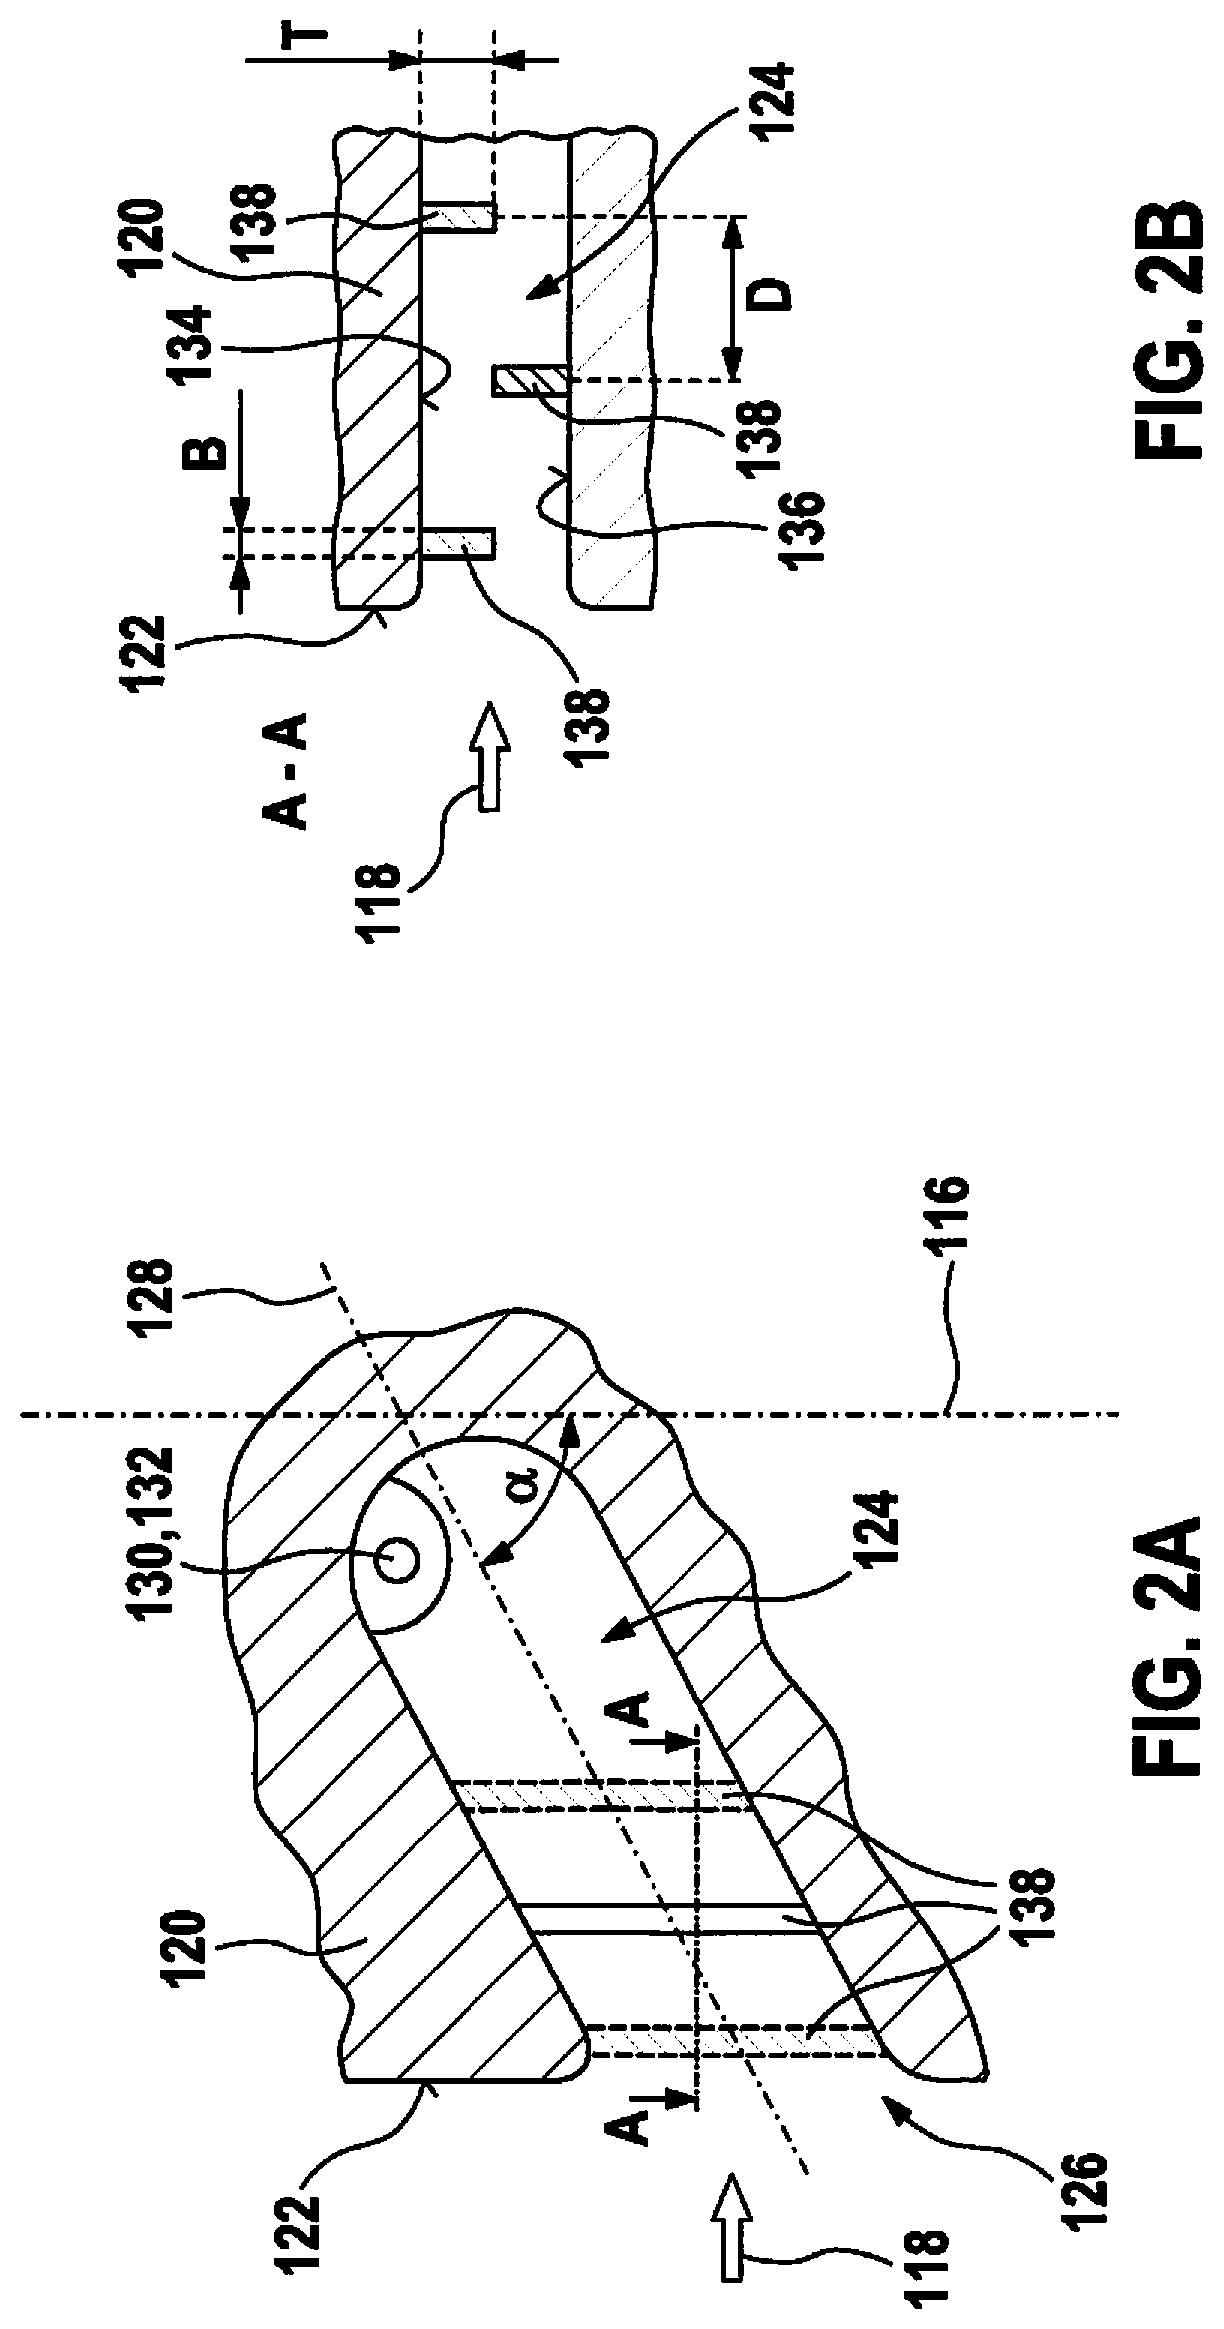 Sensor element for detecting at least one property of a fluid medium